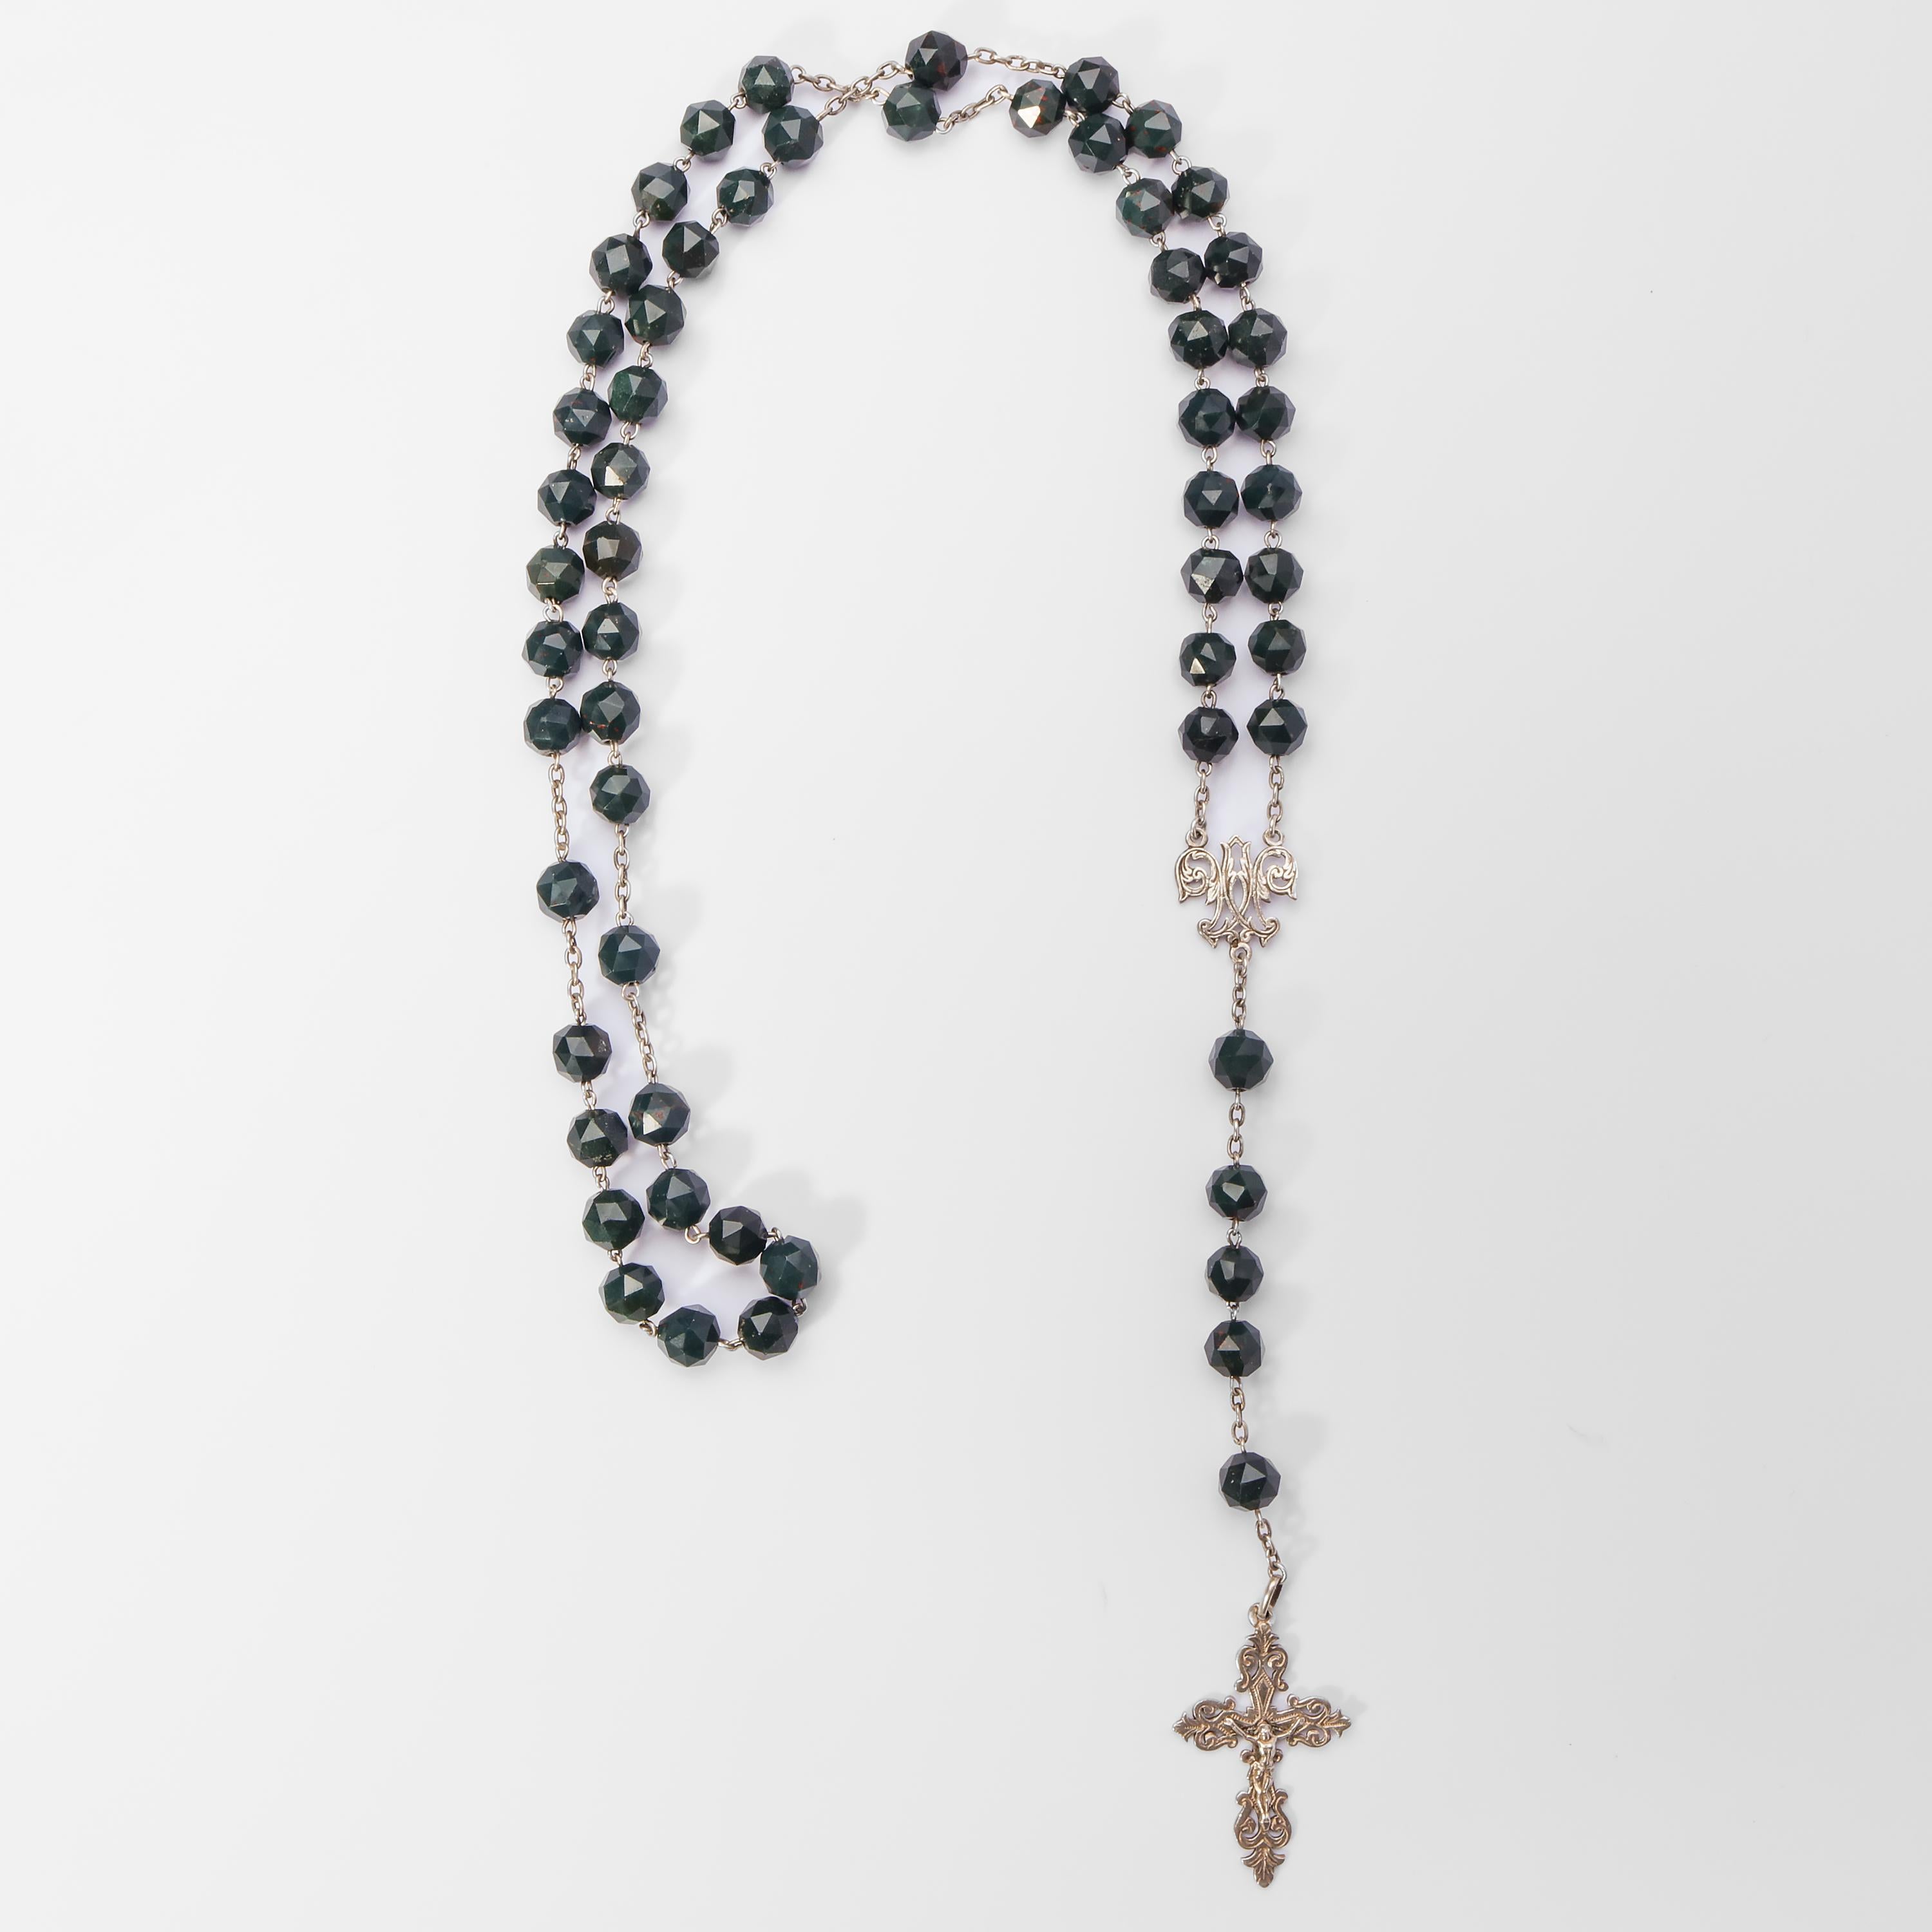 Hailing from the 1880s-1890s is this unusual and beautiful rosary from Europe —France, probably— created from hand-faceted bloodstone beads and silver in cherished (read: excellent) condition. Bloodstone is an especially interesting variety of